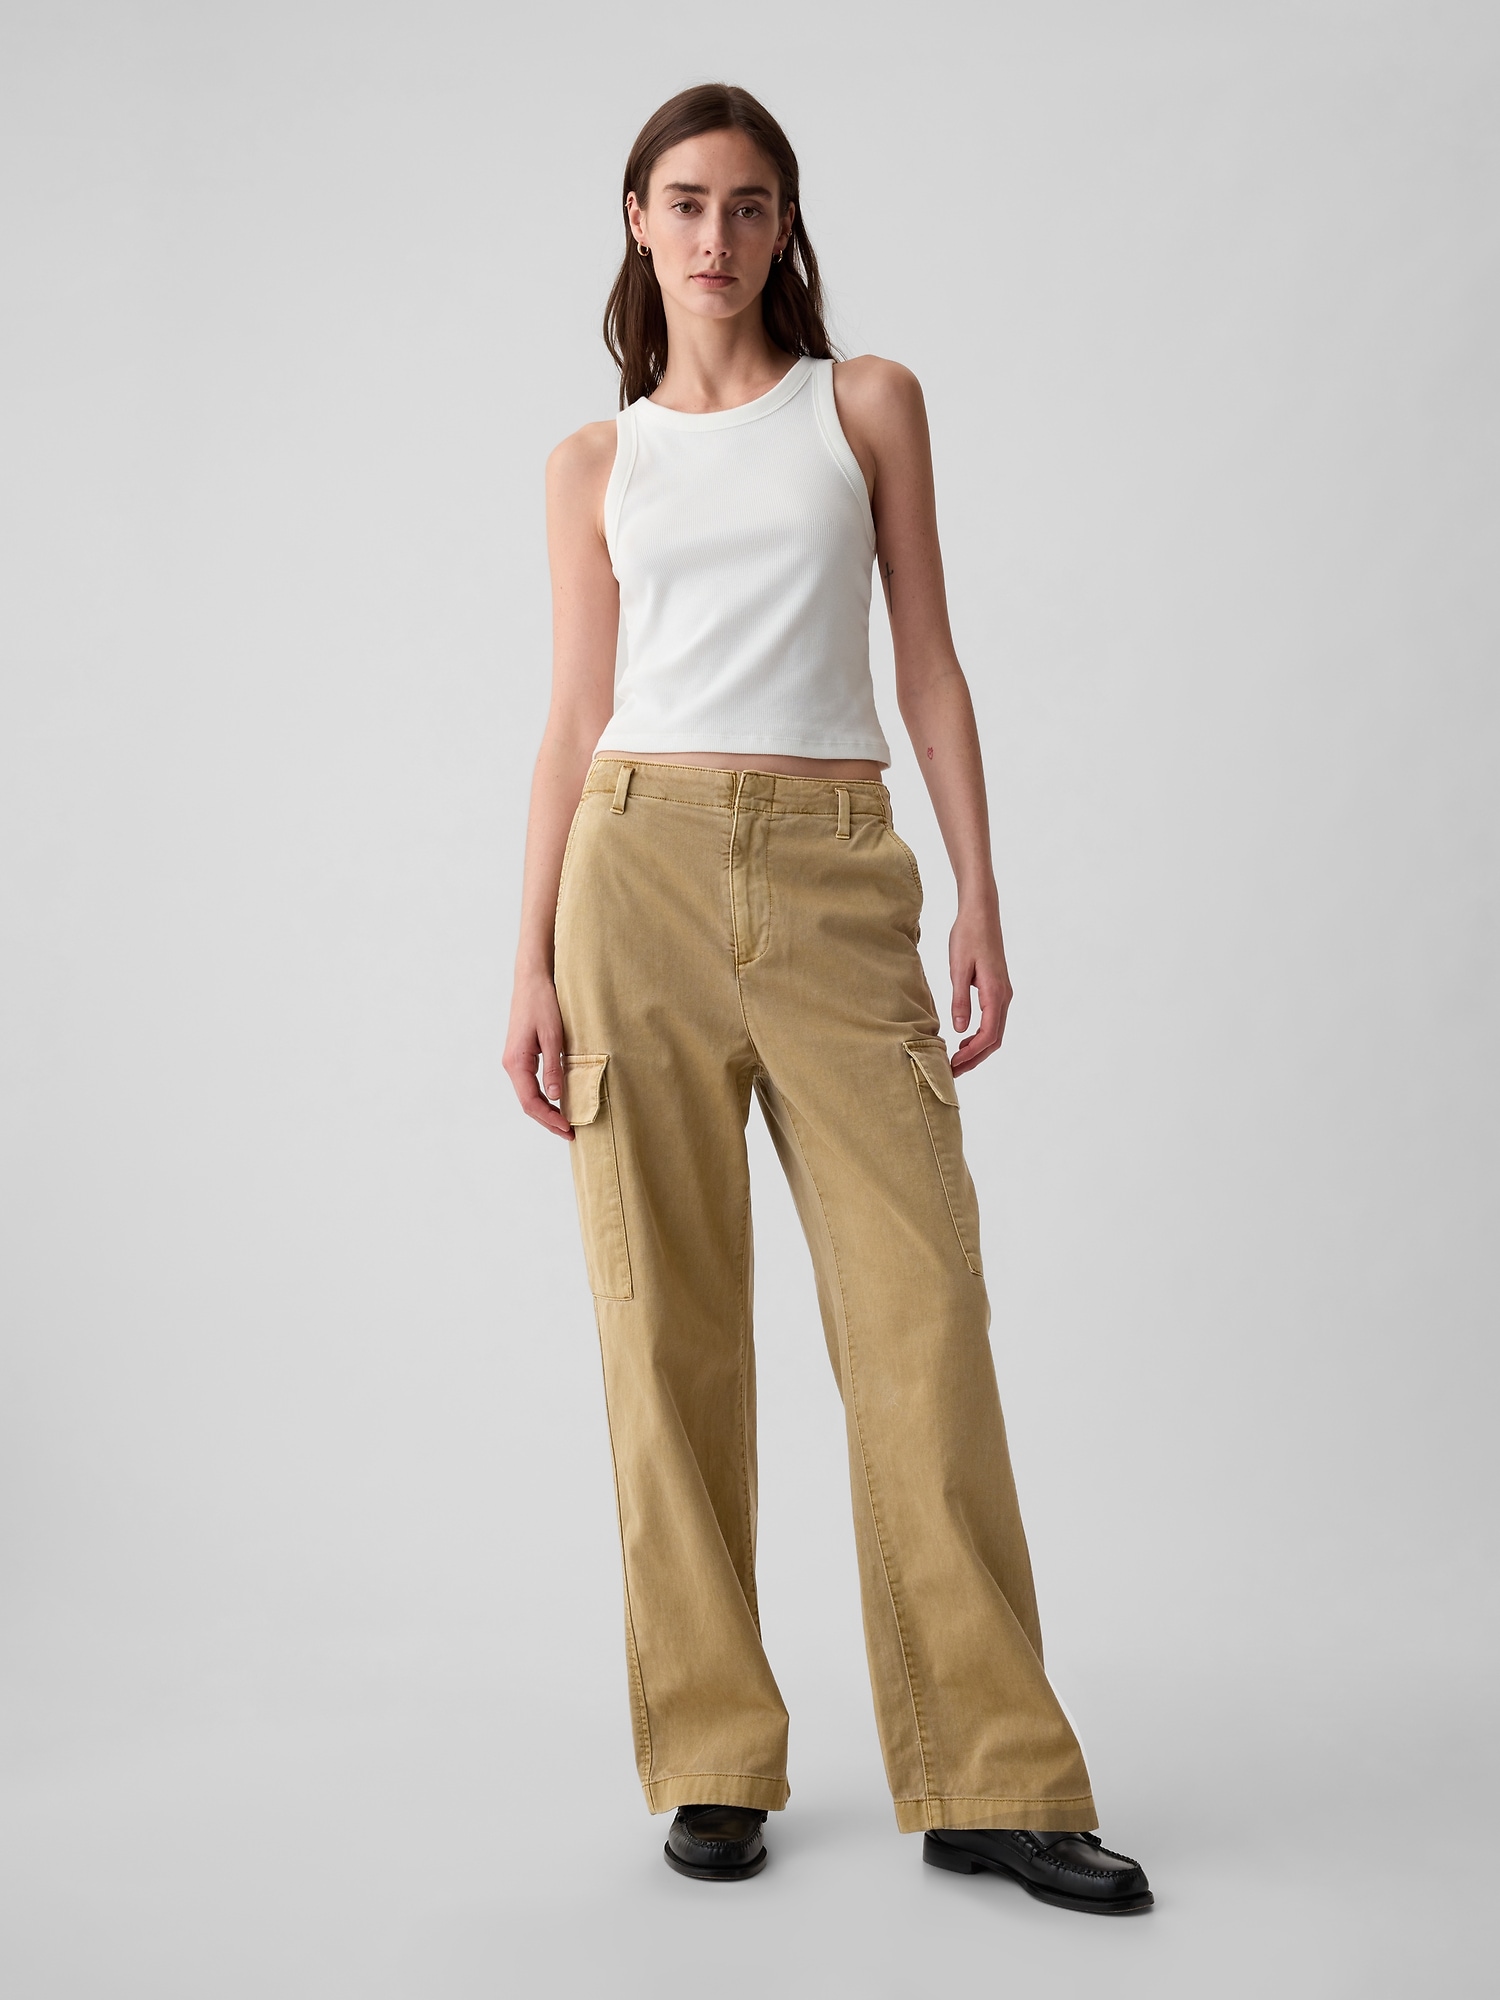 Loose Fit Pants With Pockets